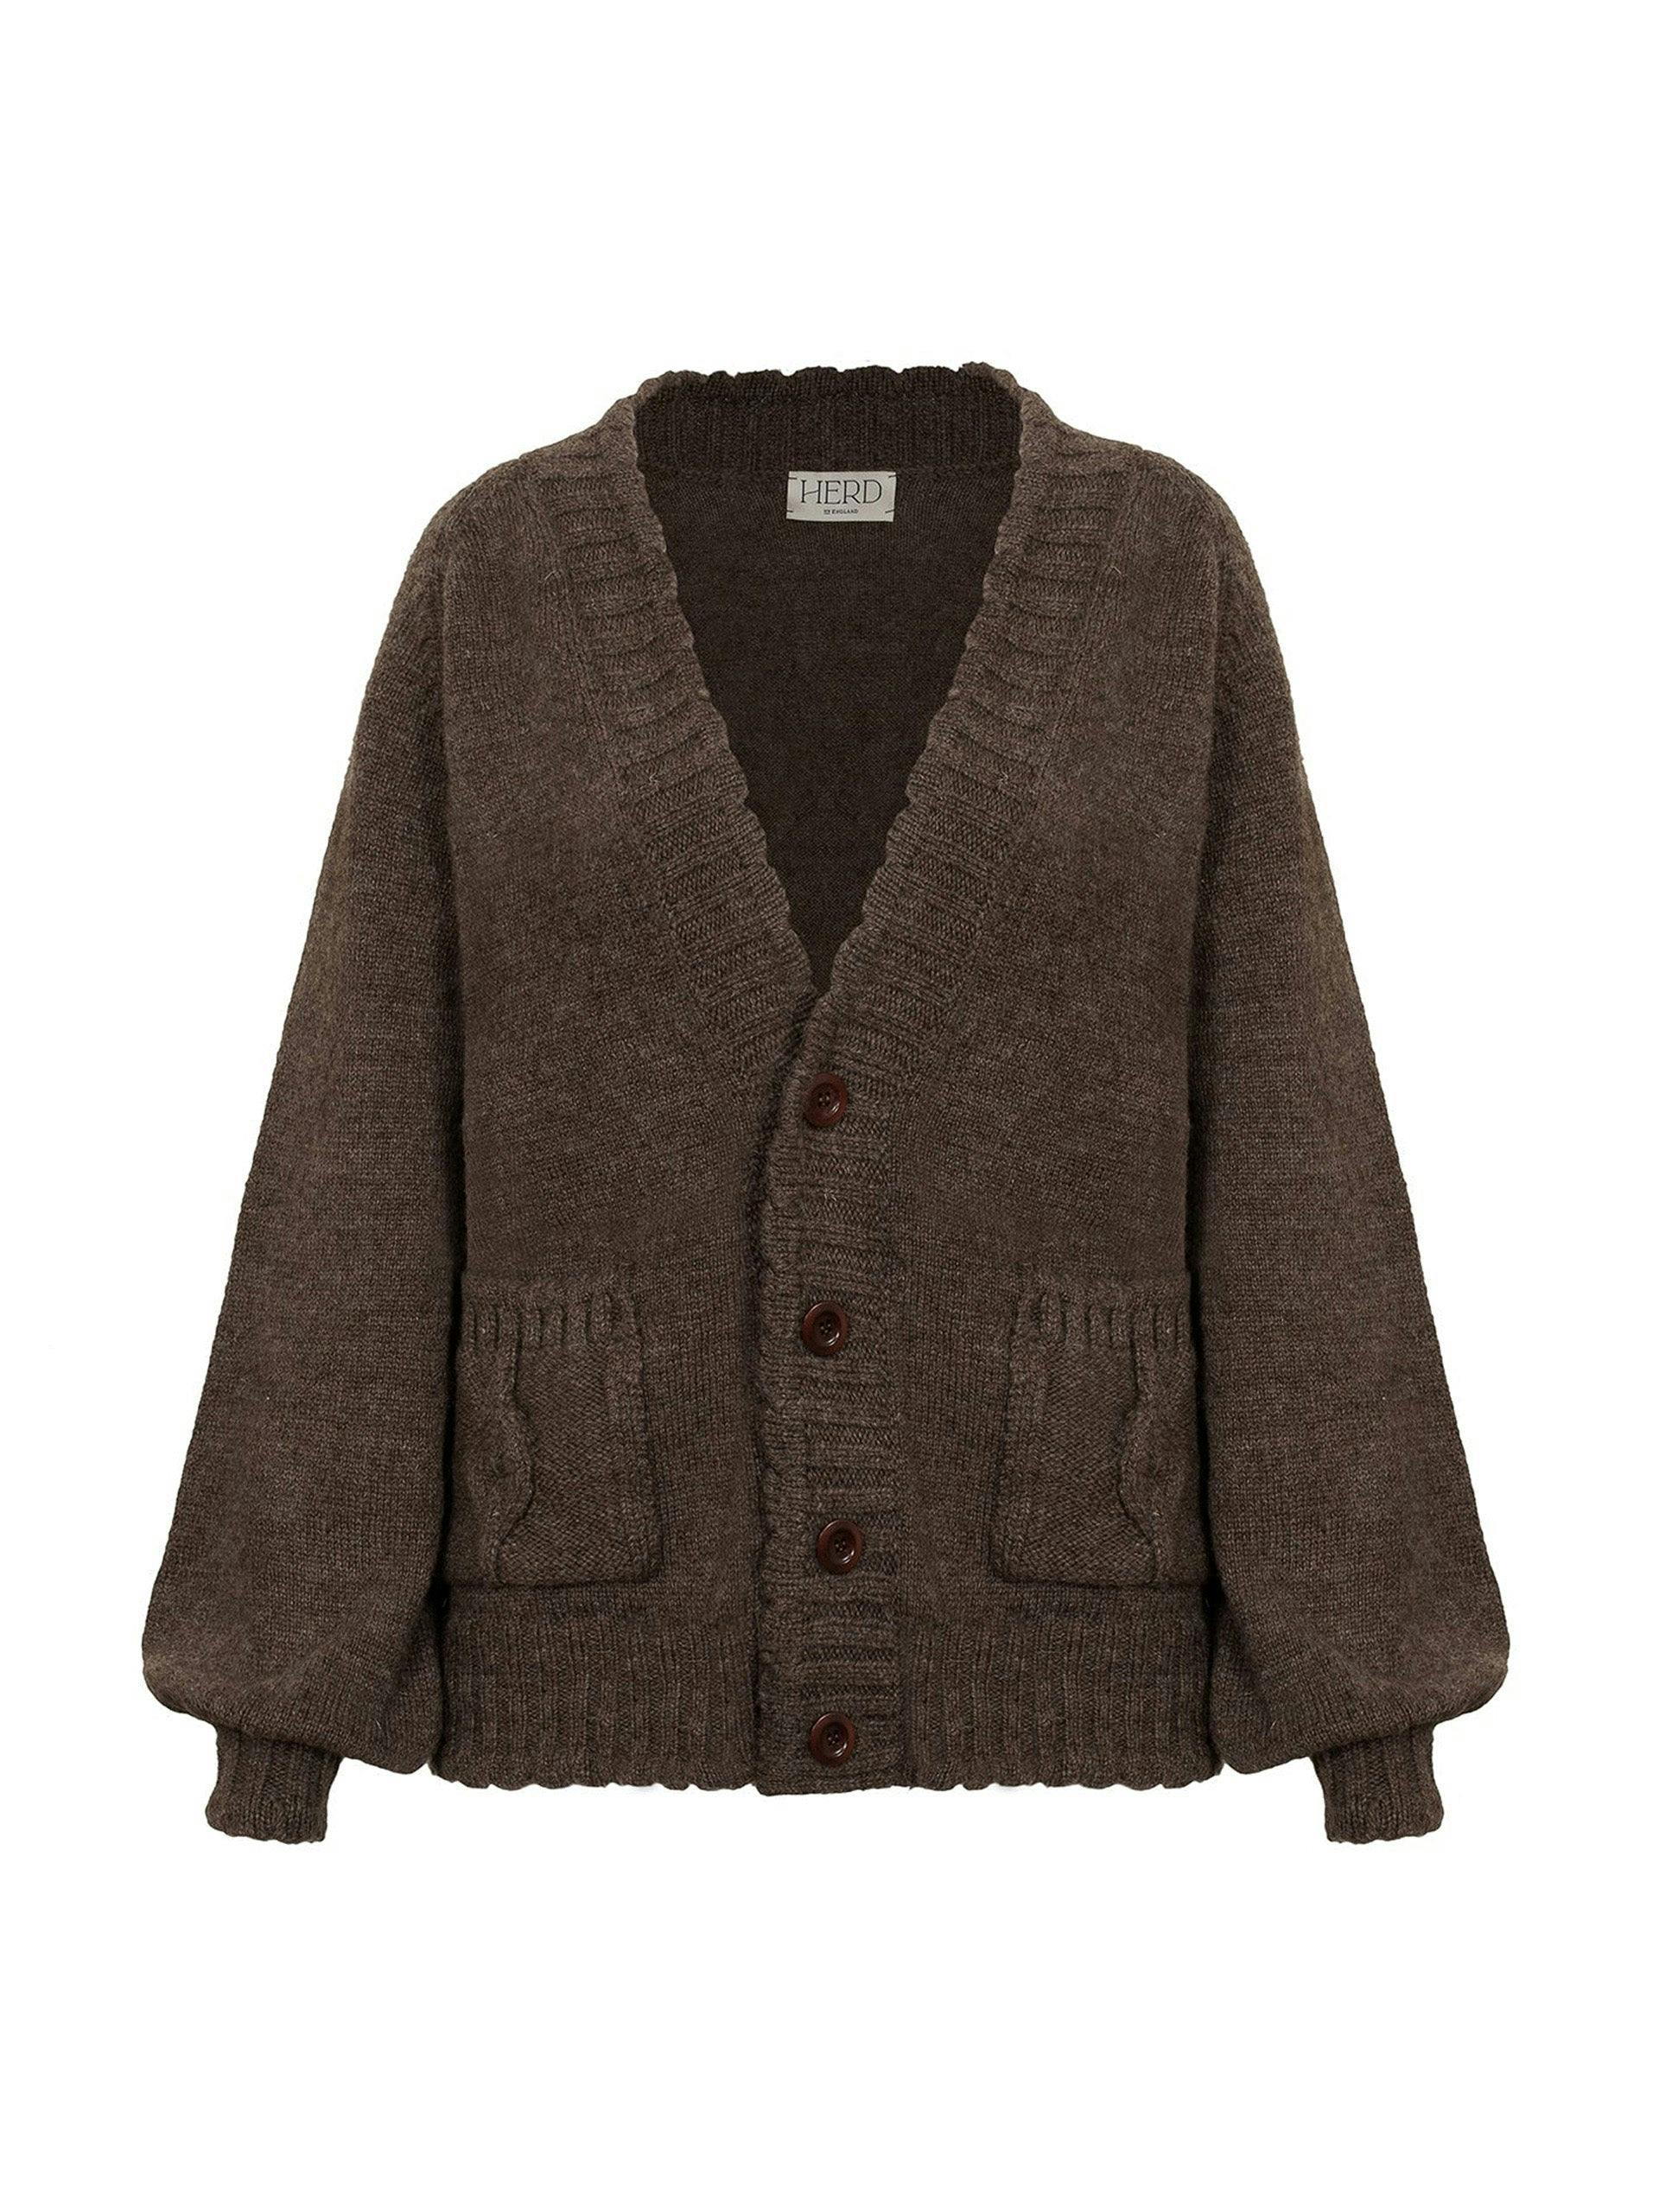 Brown knitted Wyre cardigan